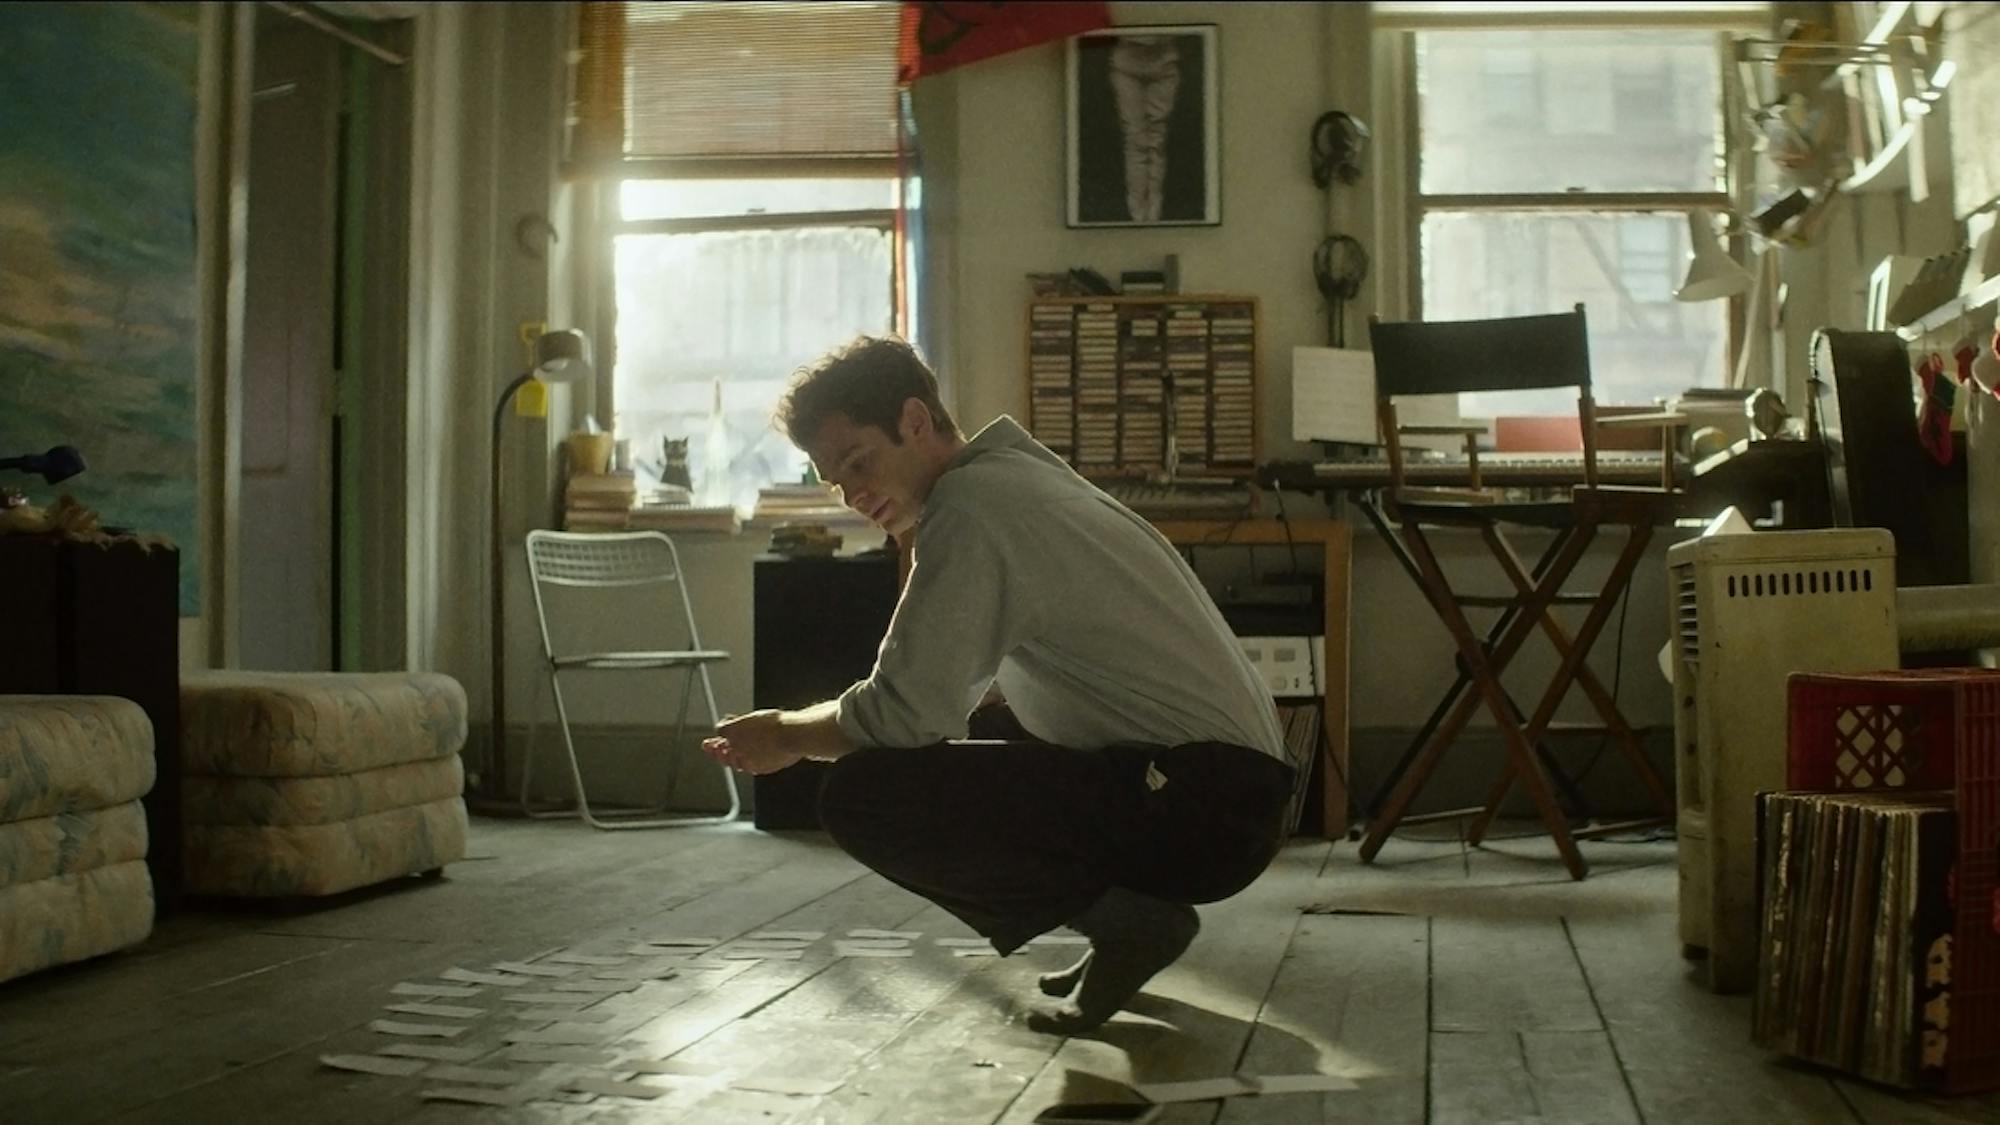 Andrew Garfield as Jonathan Larson wears a light shirt and dark pants as he squats in his apartment in front of slips of papers.  Behind him is a desk, milk crates, cushions, books, and windows.